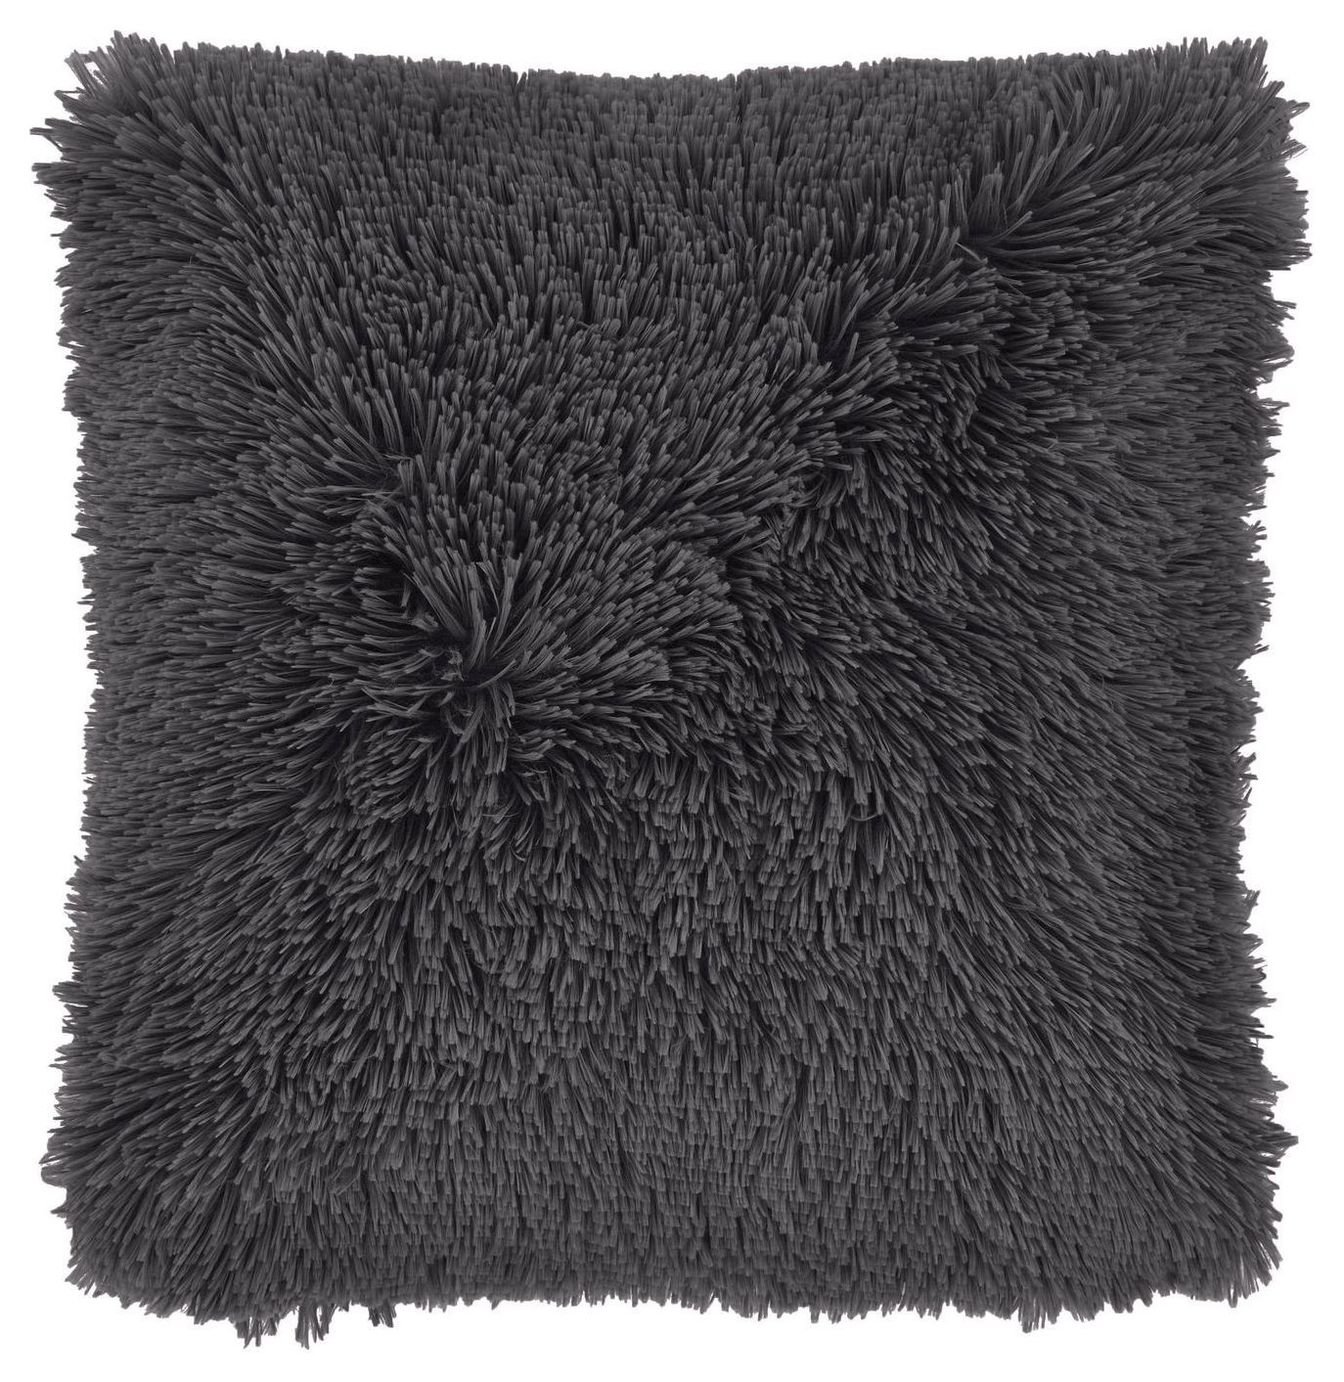 Catherine Lansfield Cuddly Cushion - Charcoal - 45x45cm